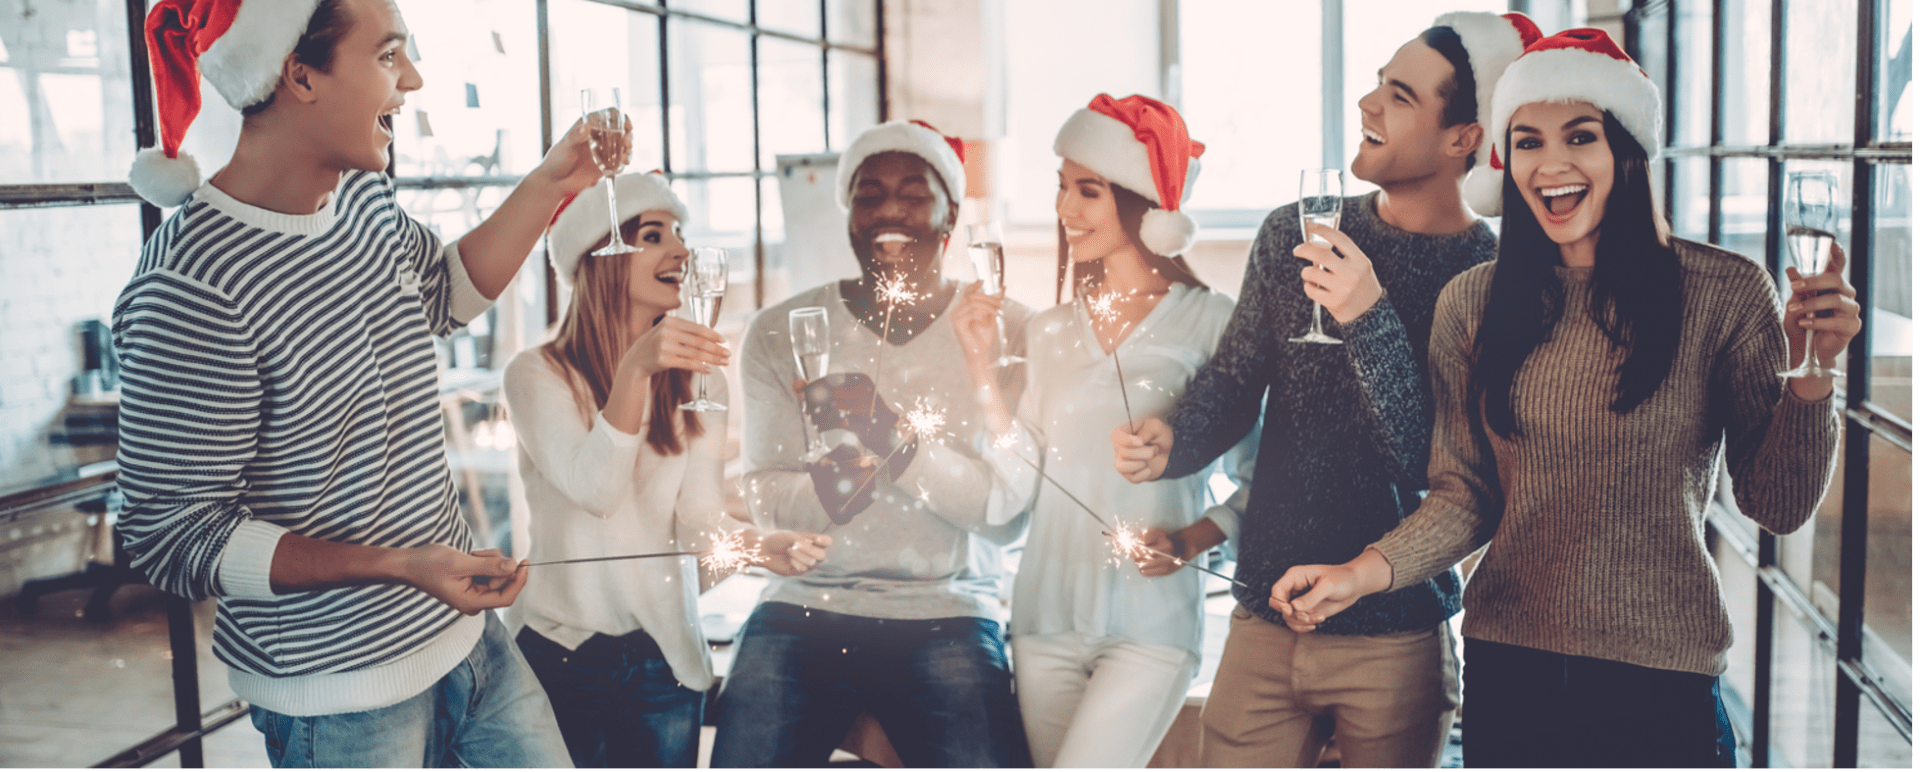 8 Unique and Fun Holiday Office Party Ideas